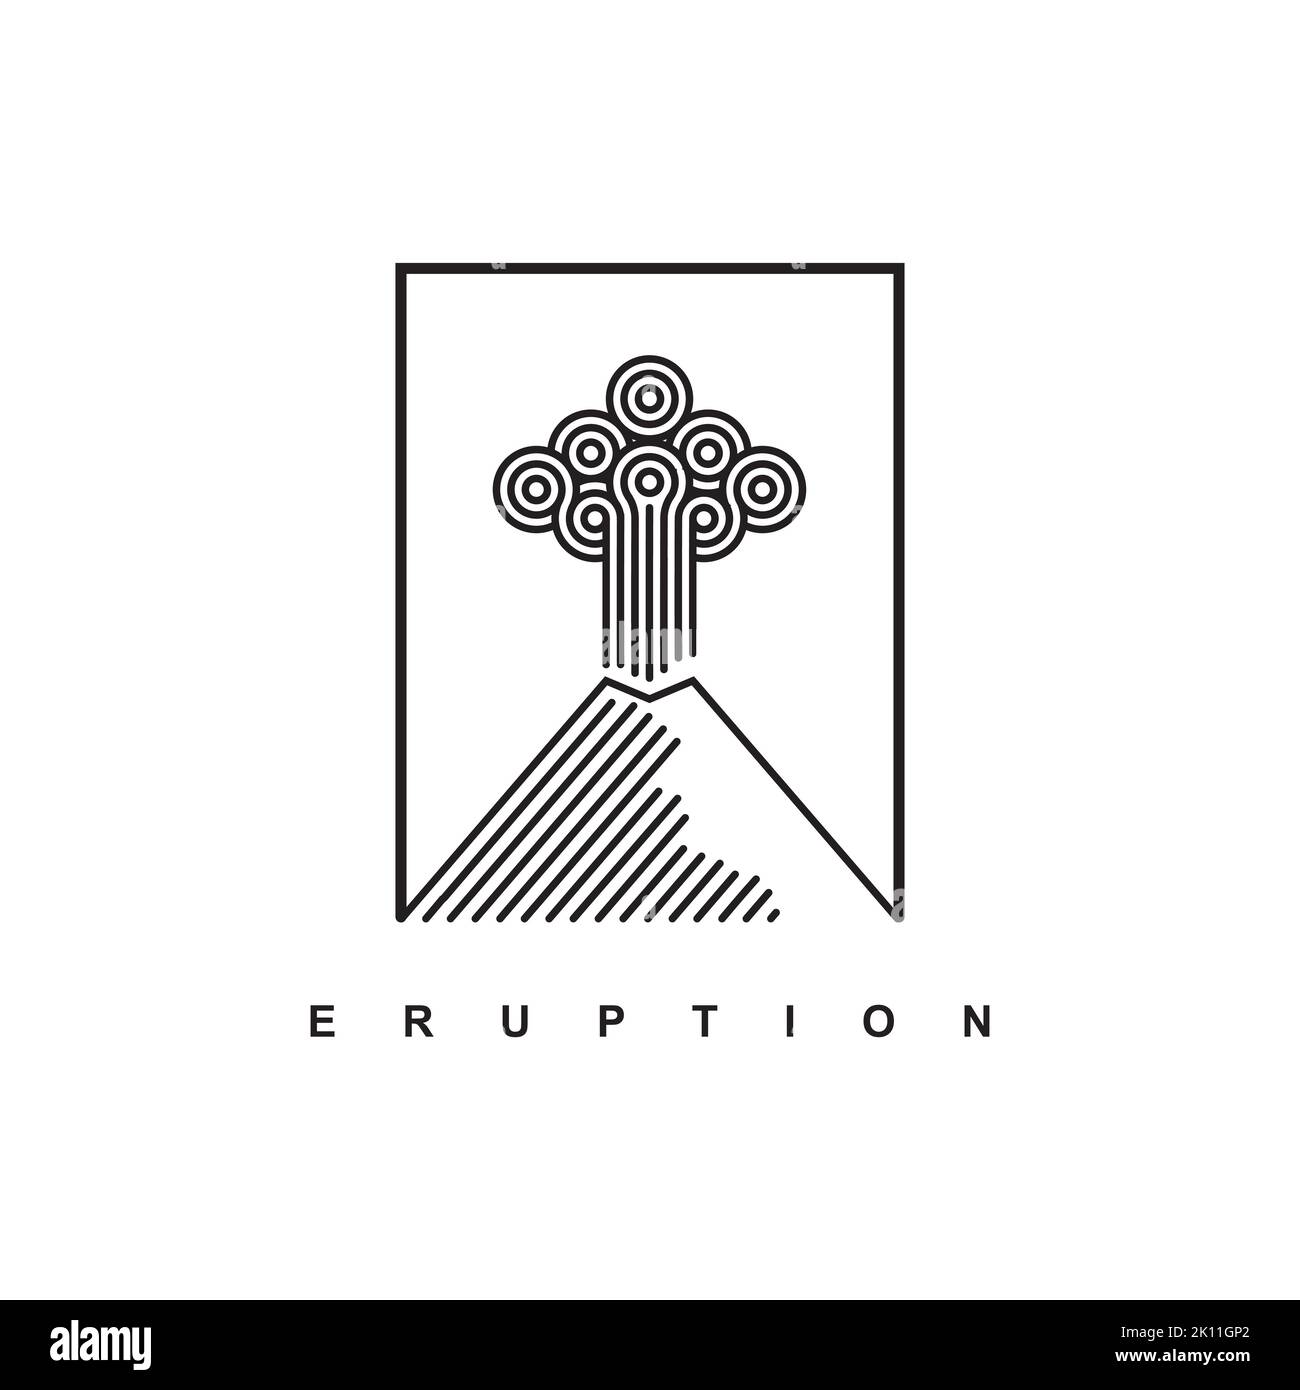 Mountain logo with linear style. Nature disaster eruption with smoke and clouds in the sky. mountain eruption logo design vector template inspiration Stock Vector